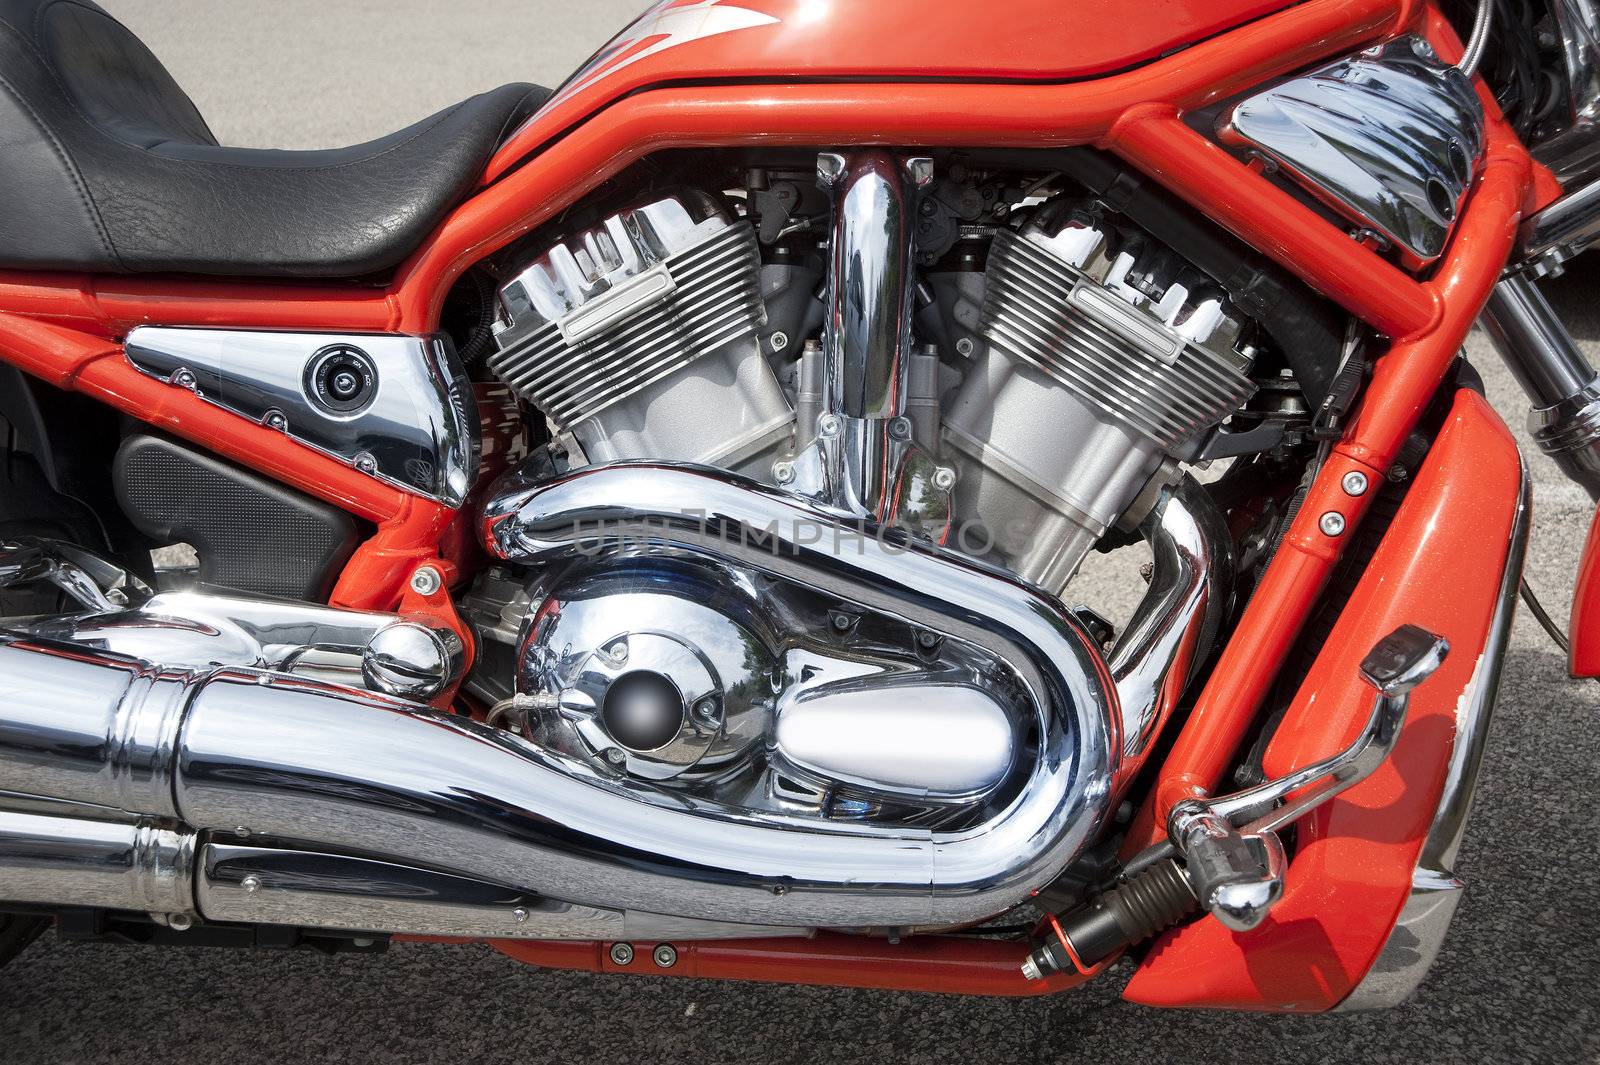 Motorcycle engine in chrome and orange